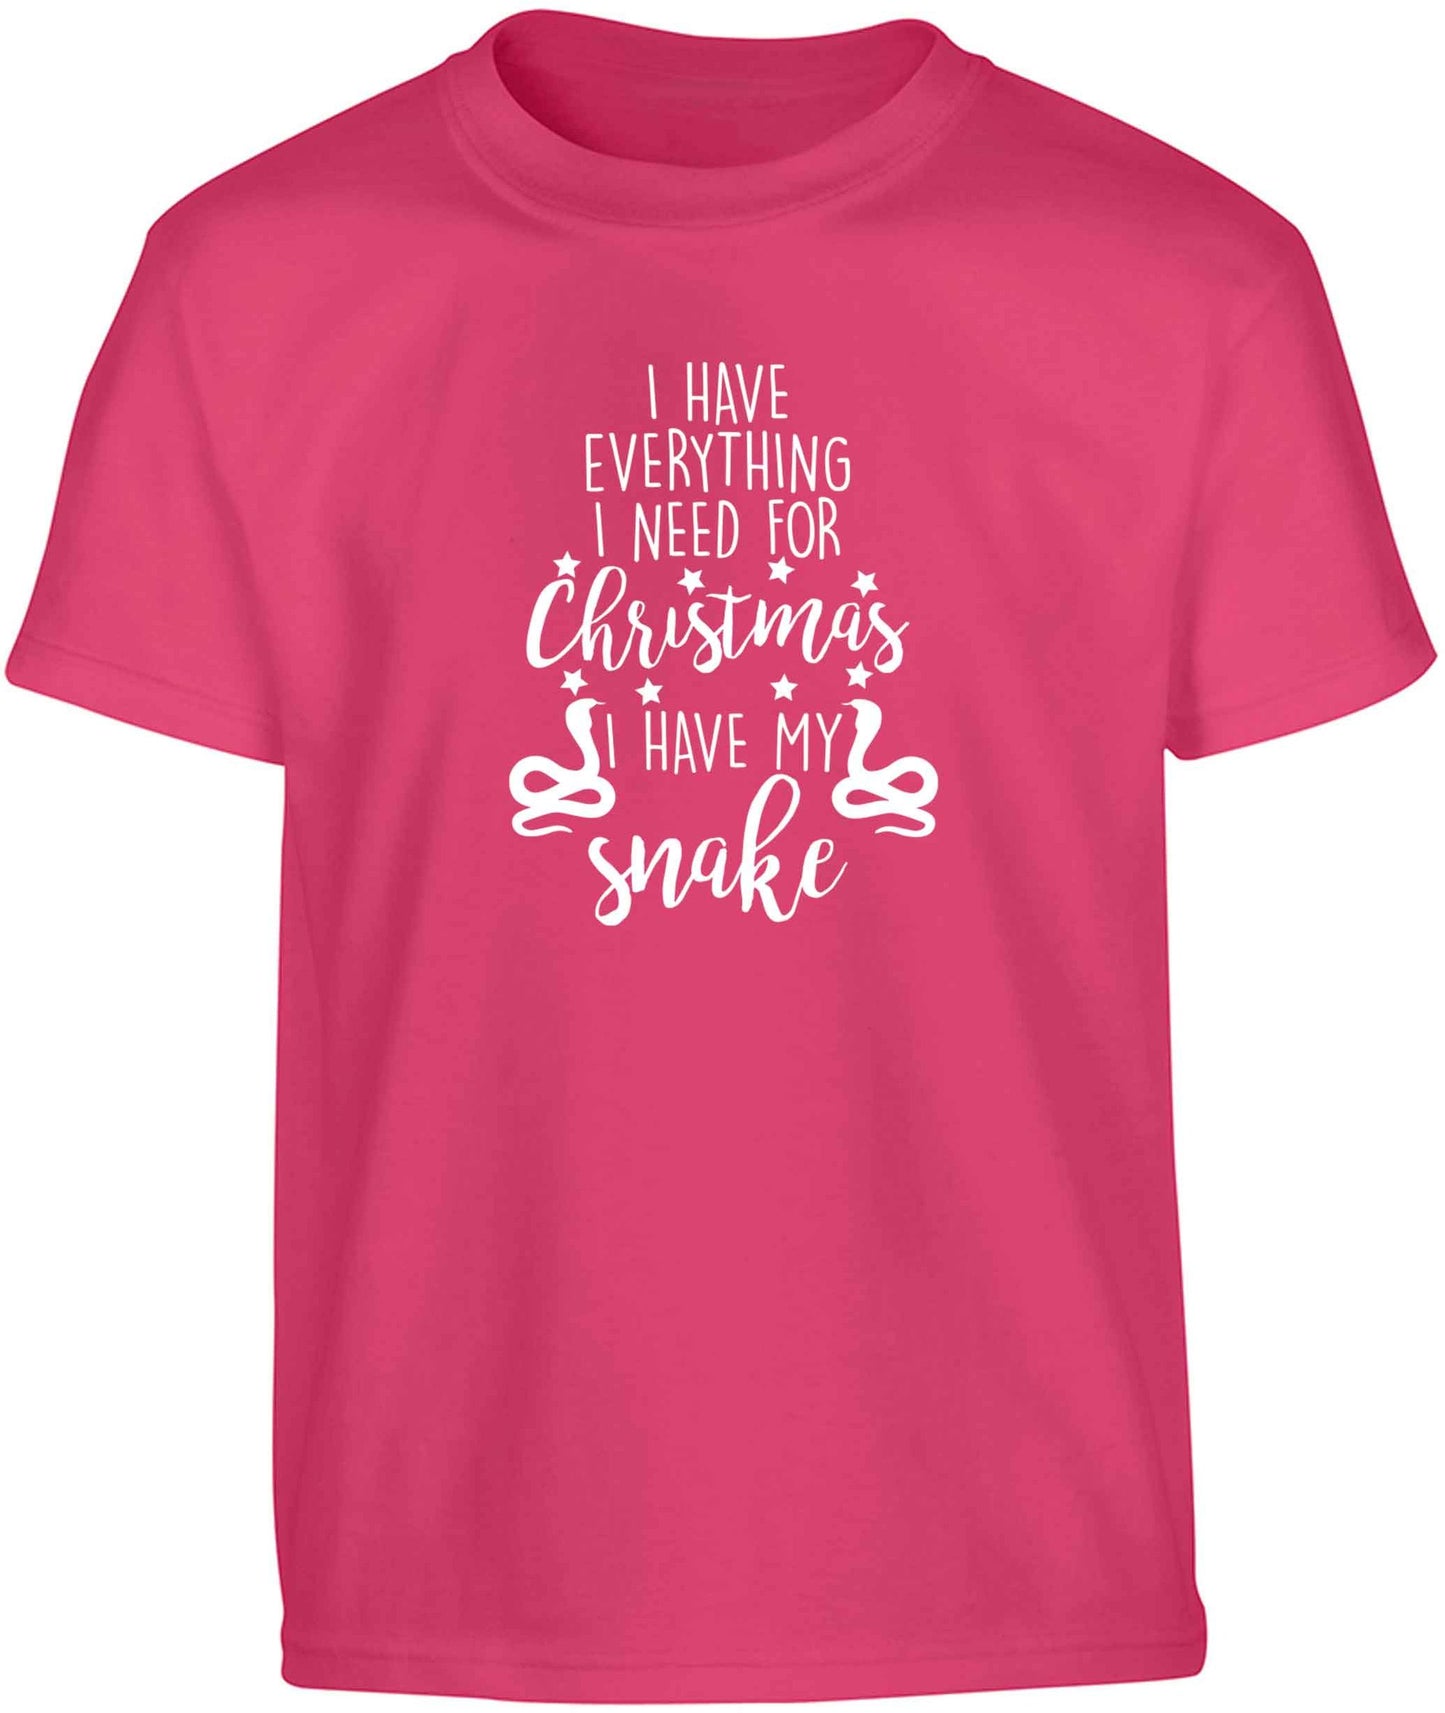 I have everything I need for Christmas I have my snake Children's pink Tshirt 12-13 Years